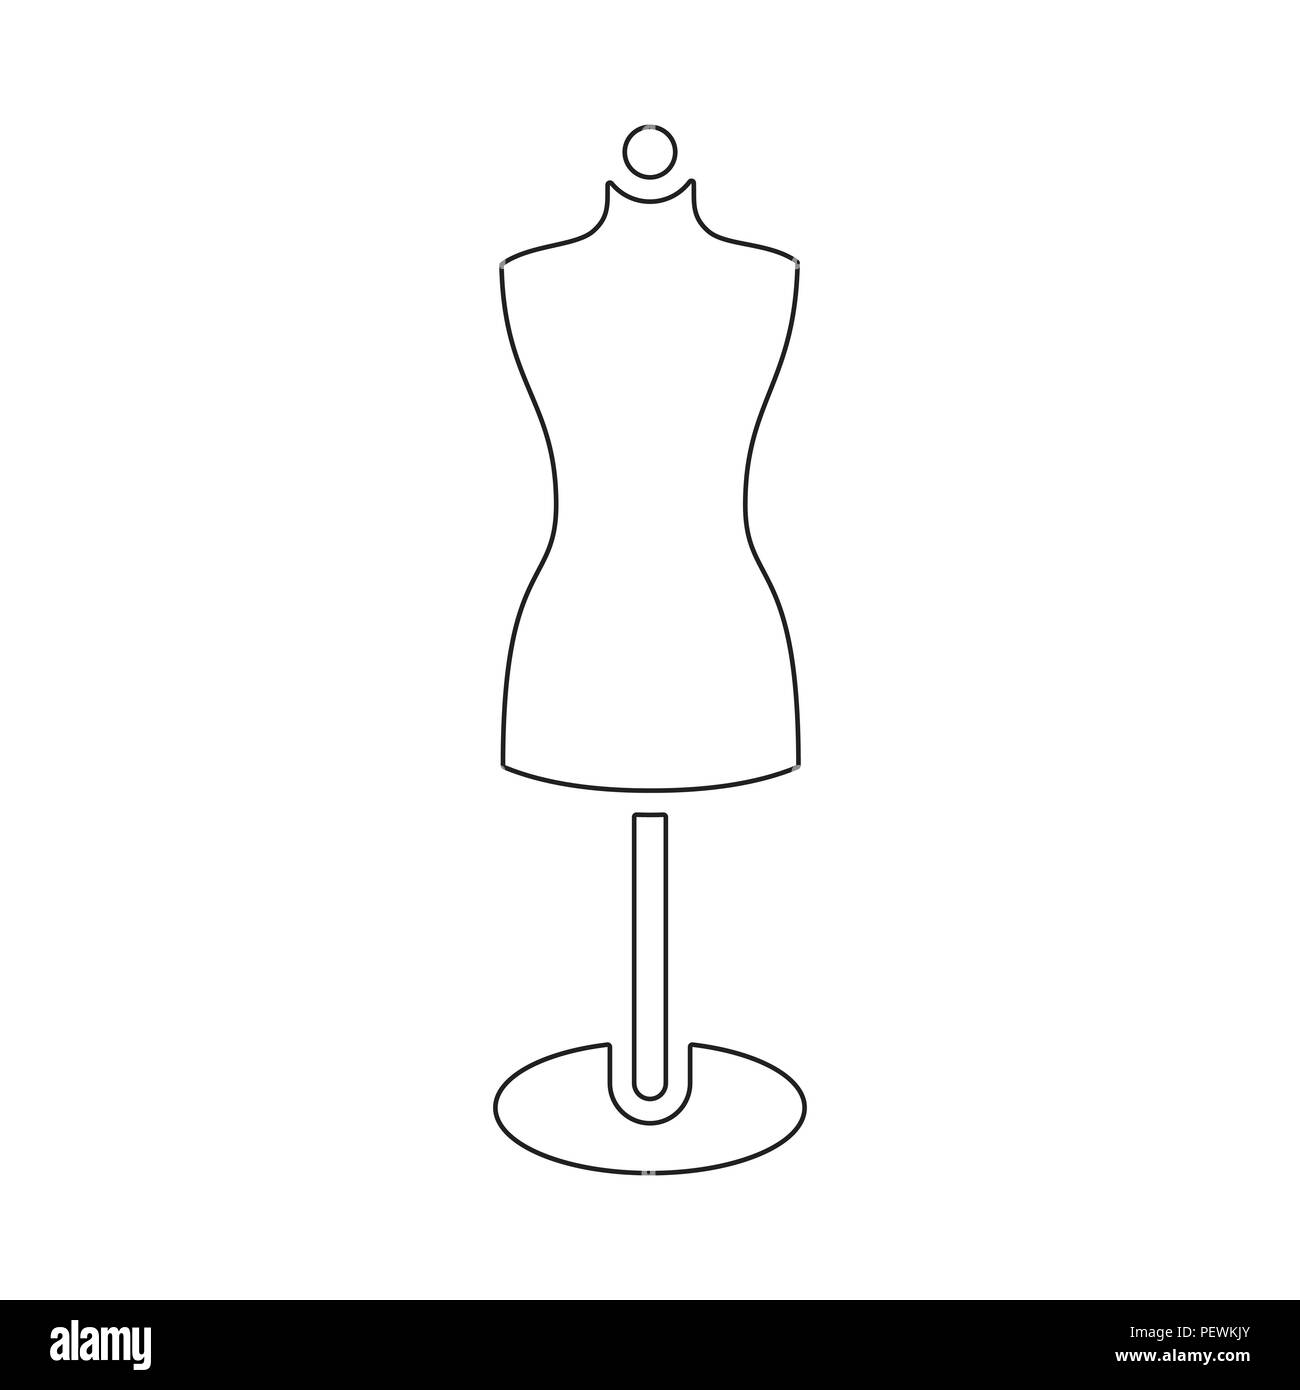 Child mannequin icon cartoon style Royalty Free Vector Image